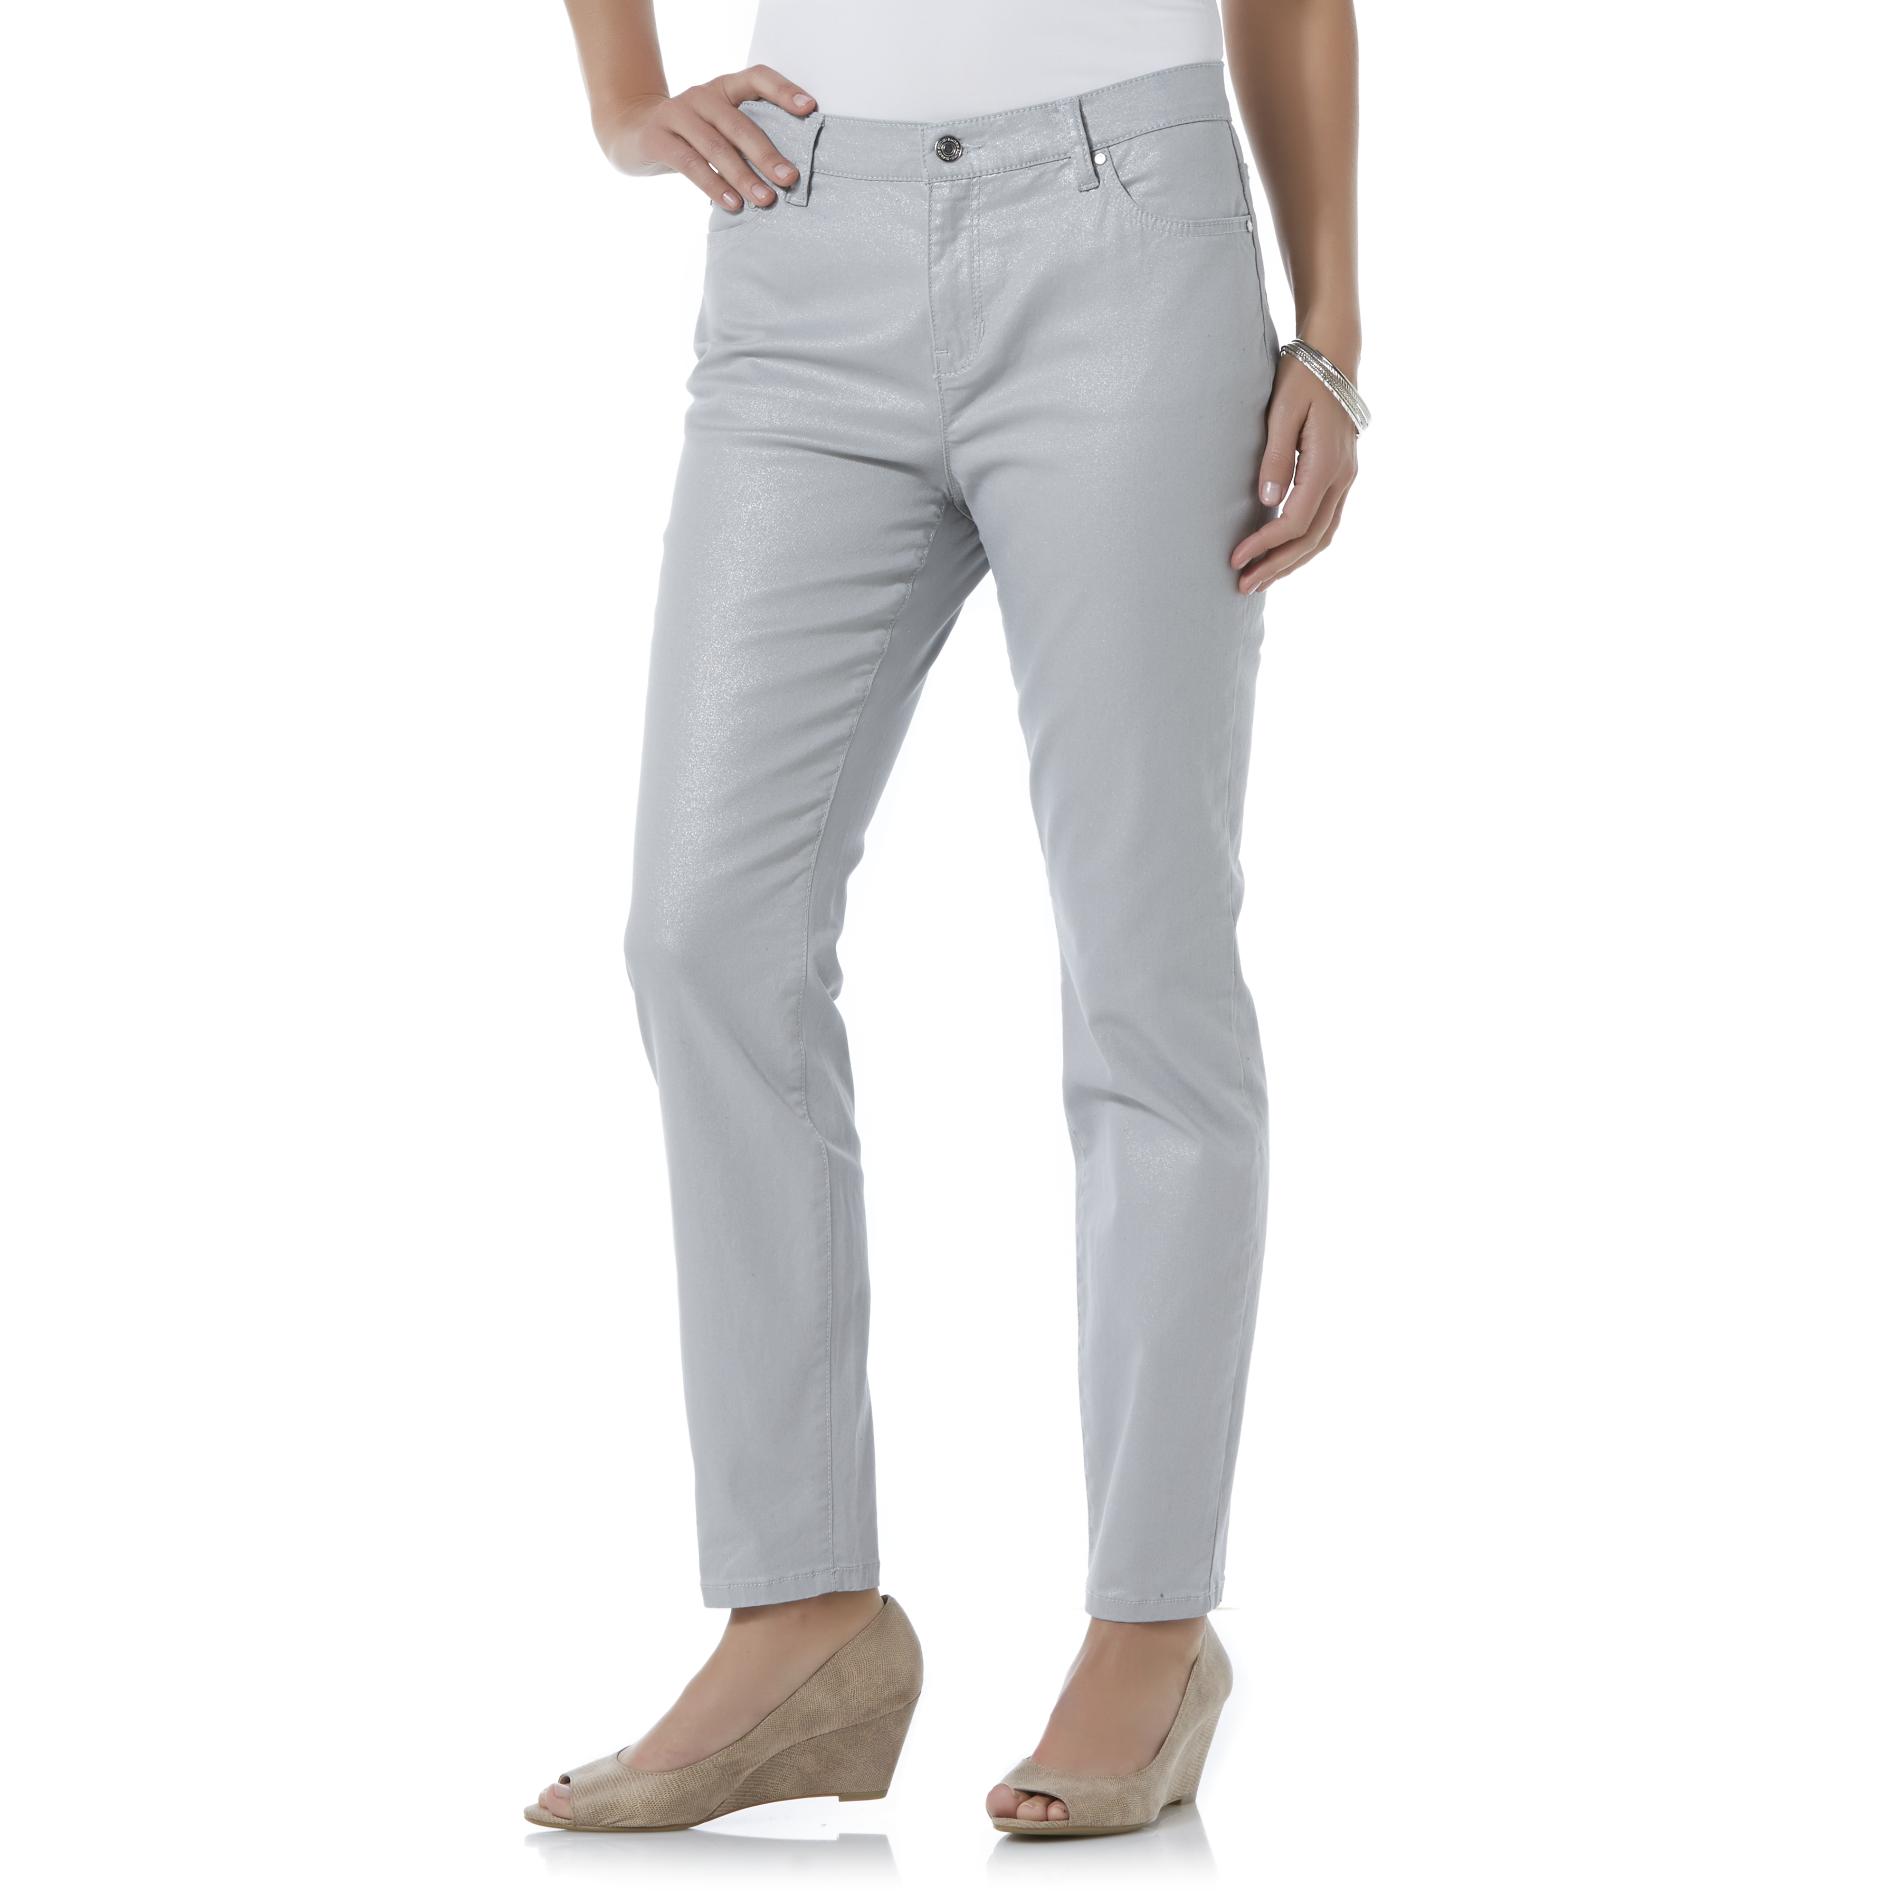 Jaclyn Smith Women's Metallic Coated Jeans - Clothing, Shoes & Jewelry ...